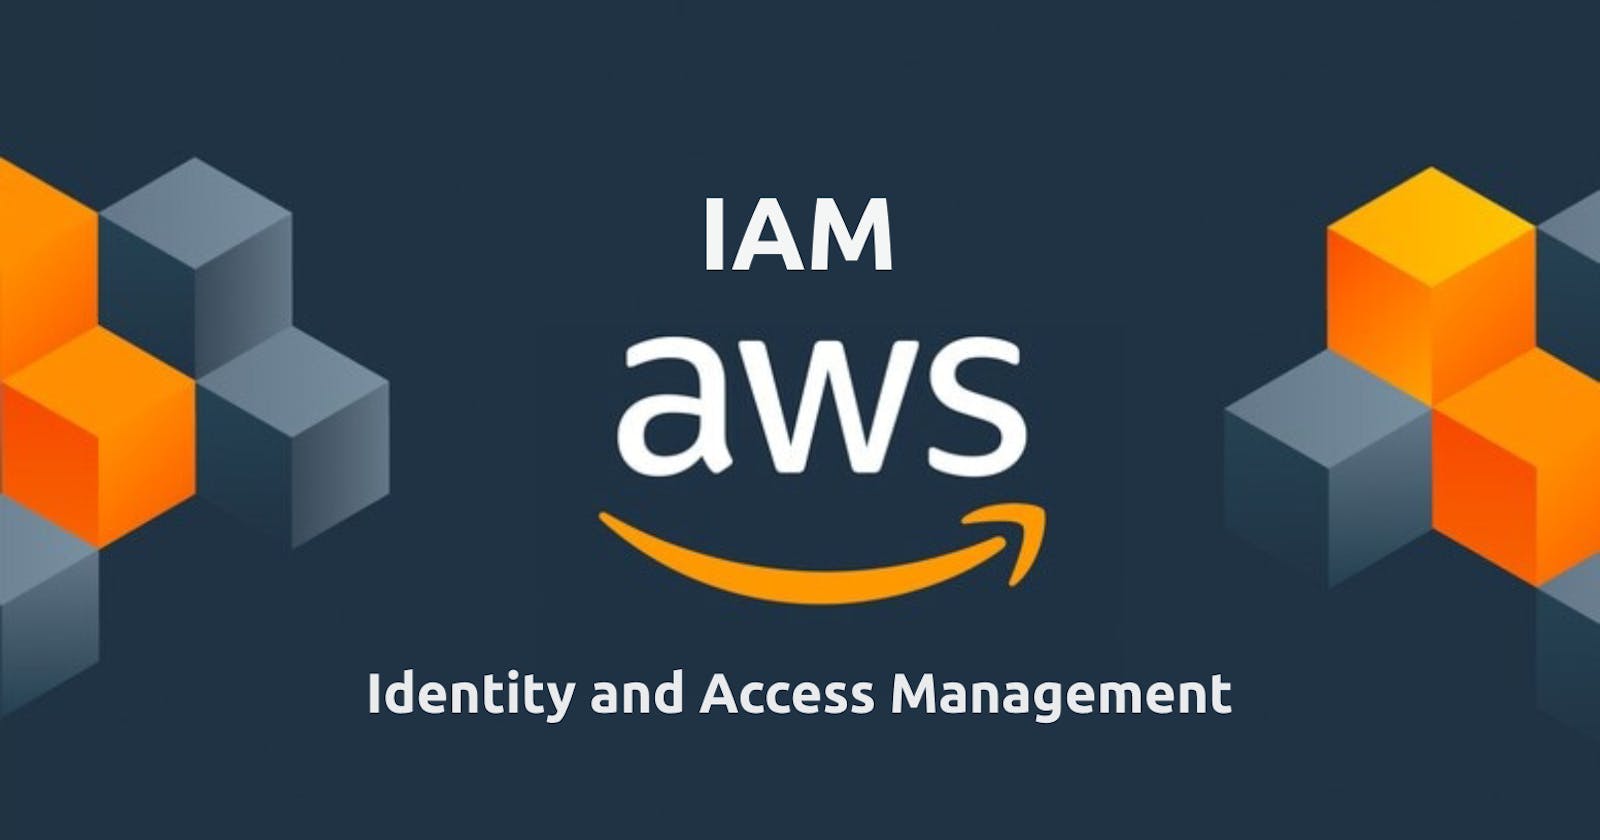 AWS - IAM create user, add to group and attach policies